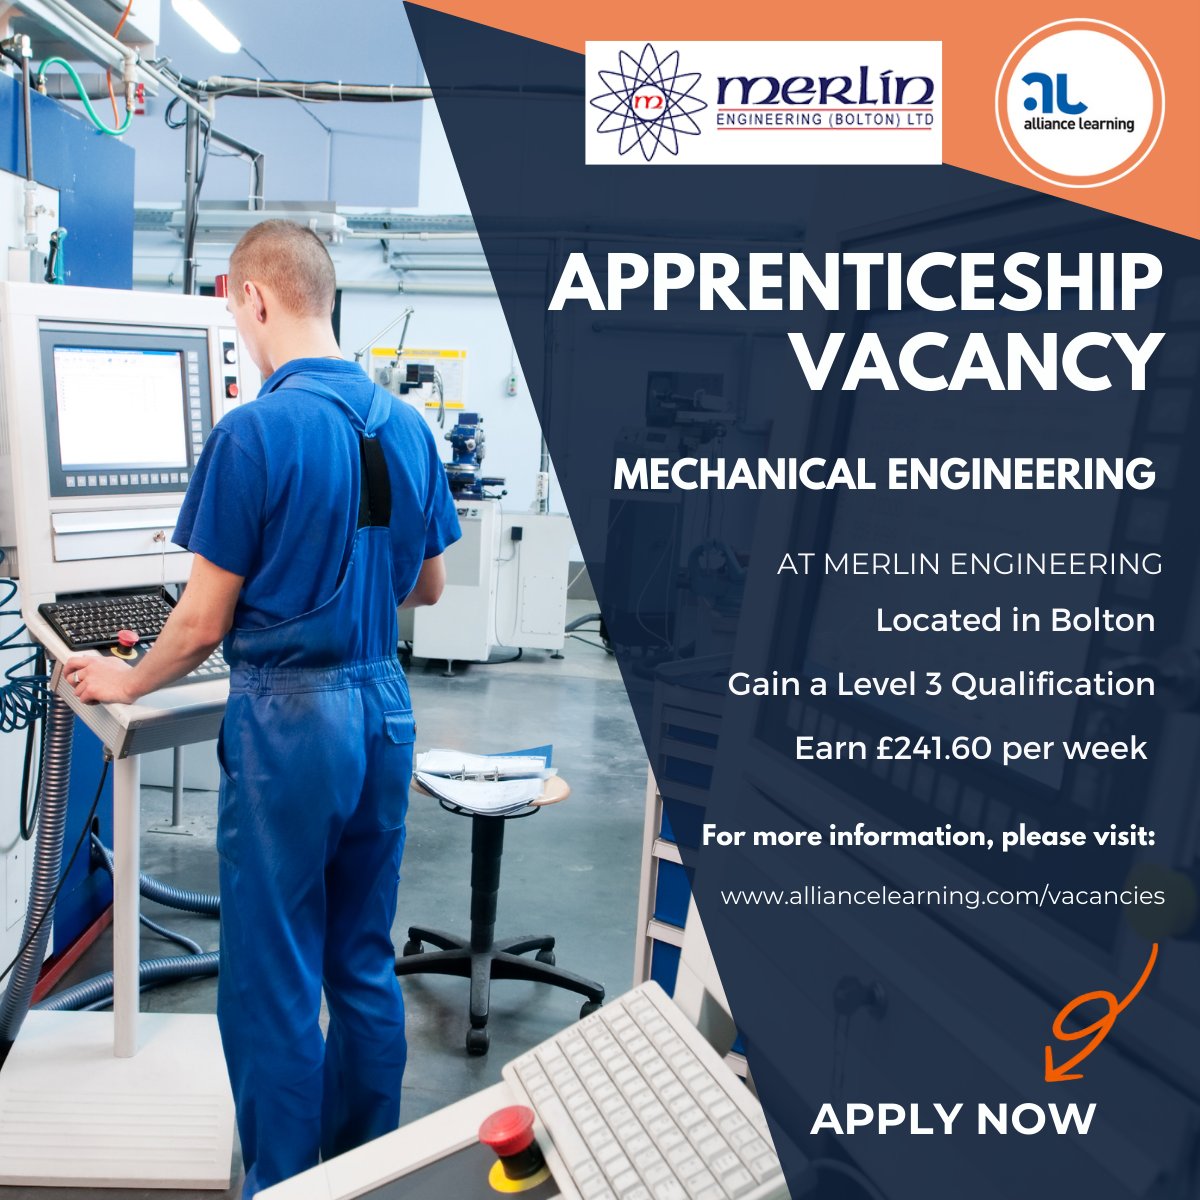 ✨ Merlin Engineering is on the lookout for a talented Engineering Machinist Apprentice to join their team! 🛠️ Apply here: rb.gy/b0nex8 #MerlinEngineering #EngineeringApprentice #PrecisionEngineering #CareerOpportunity